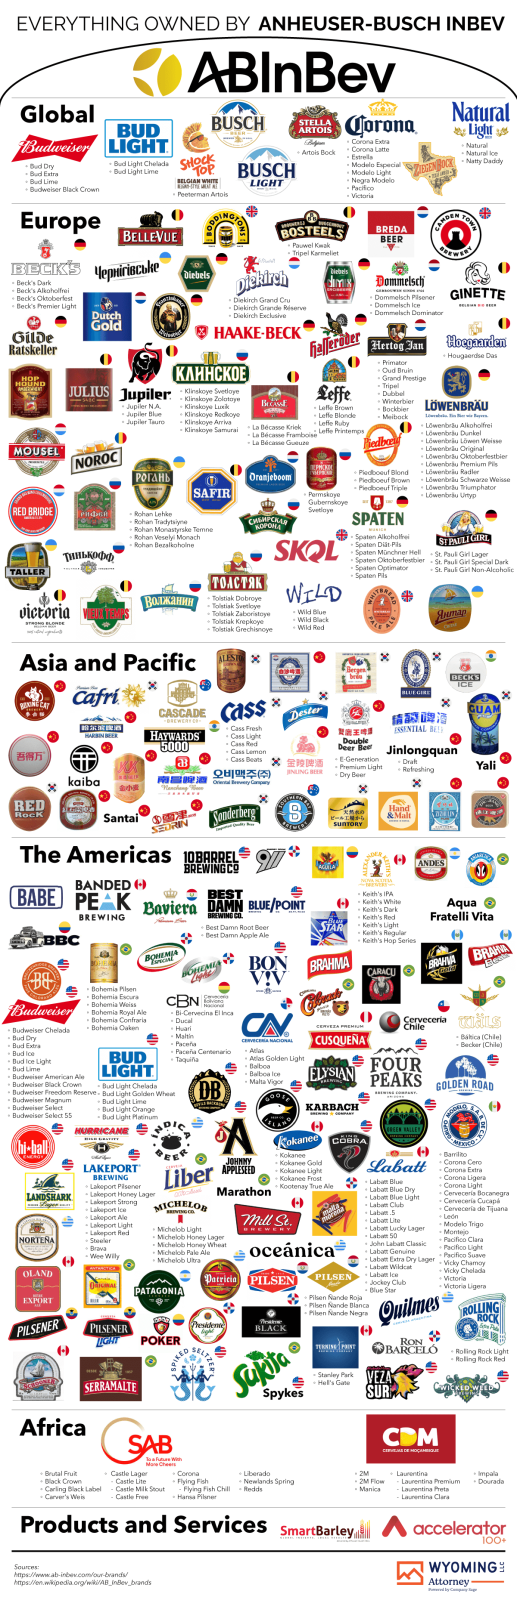 everything-owned-by-anheuser-busch-inbev-6_c.png